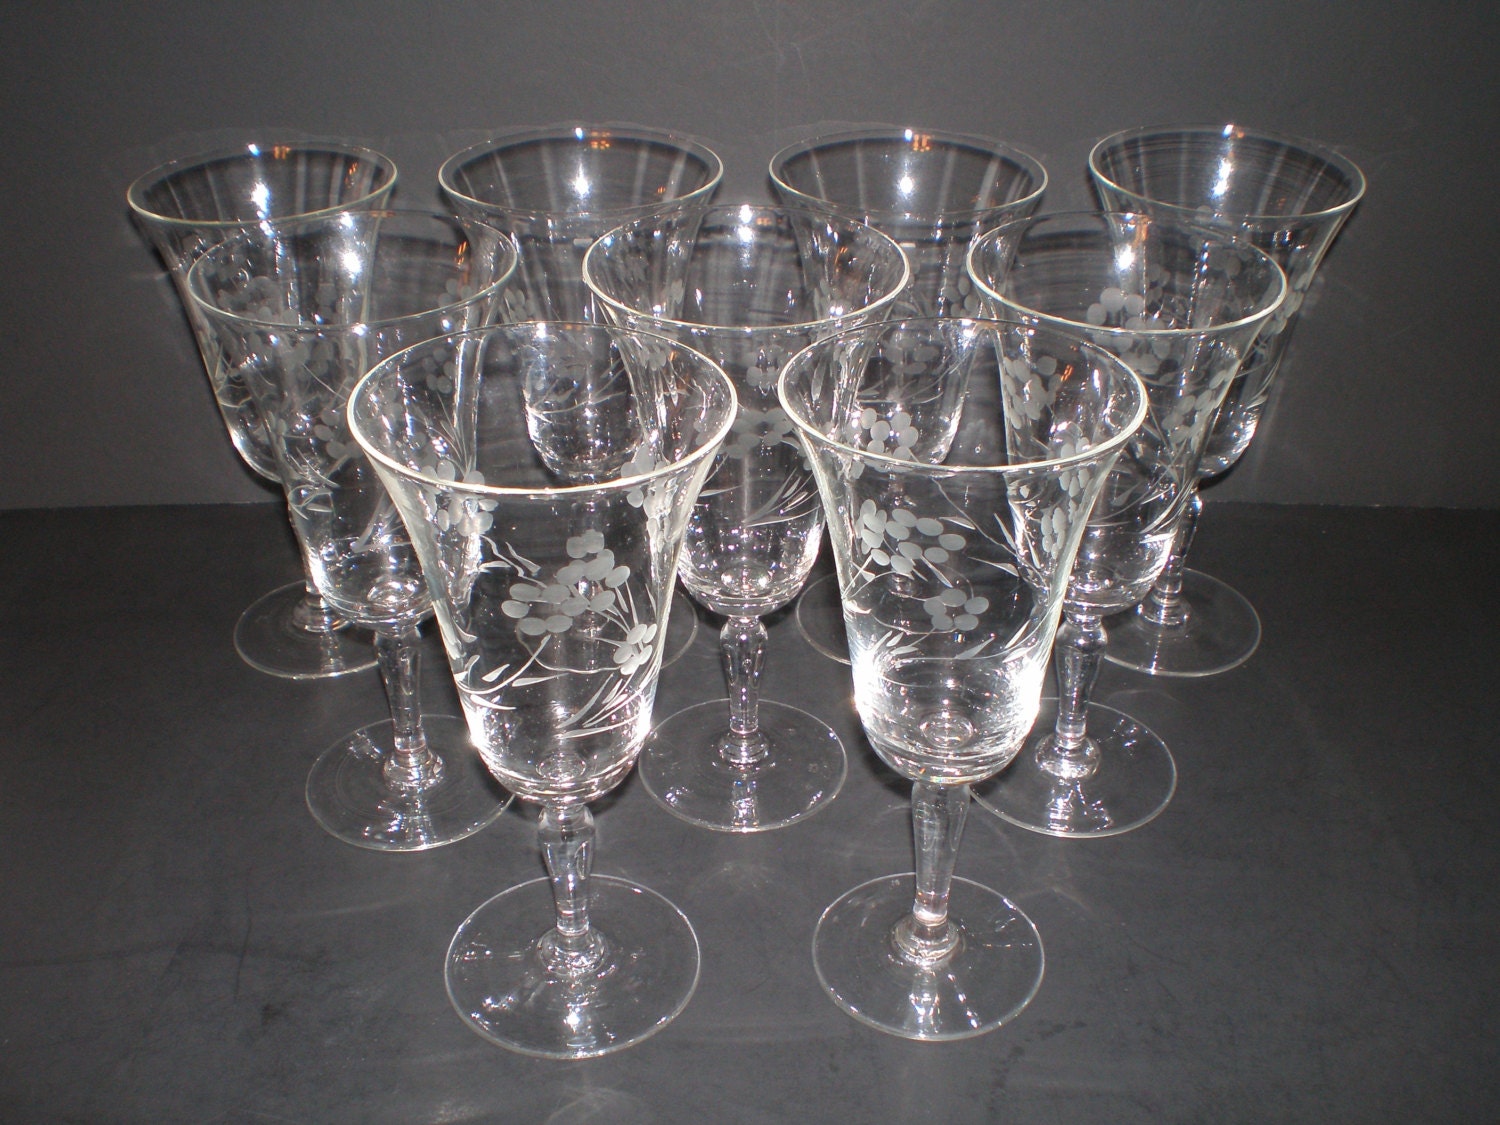 9 Etched Wine Glasses Libbey Stemware Clear Glass Vintage